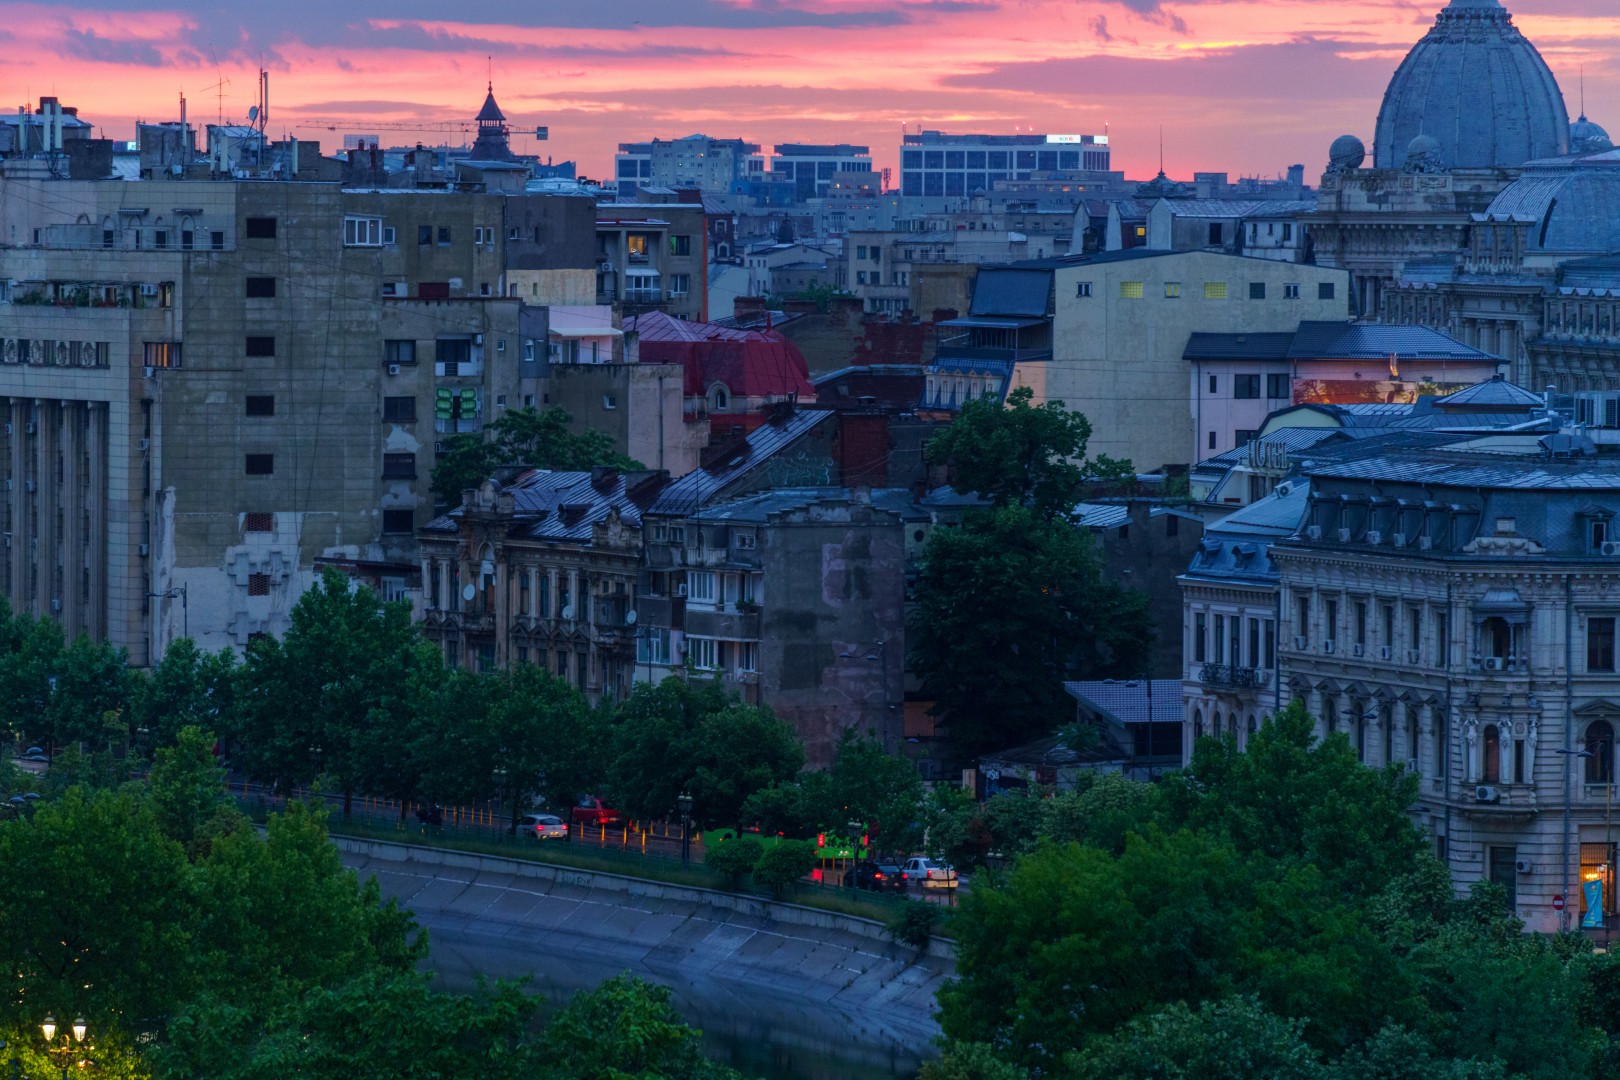 City Panorama in Bucharest on June 11, 2021 (087a5716ed)